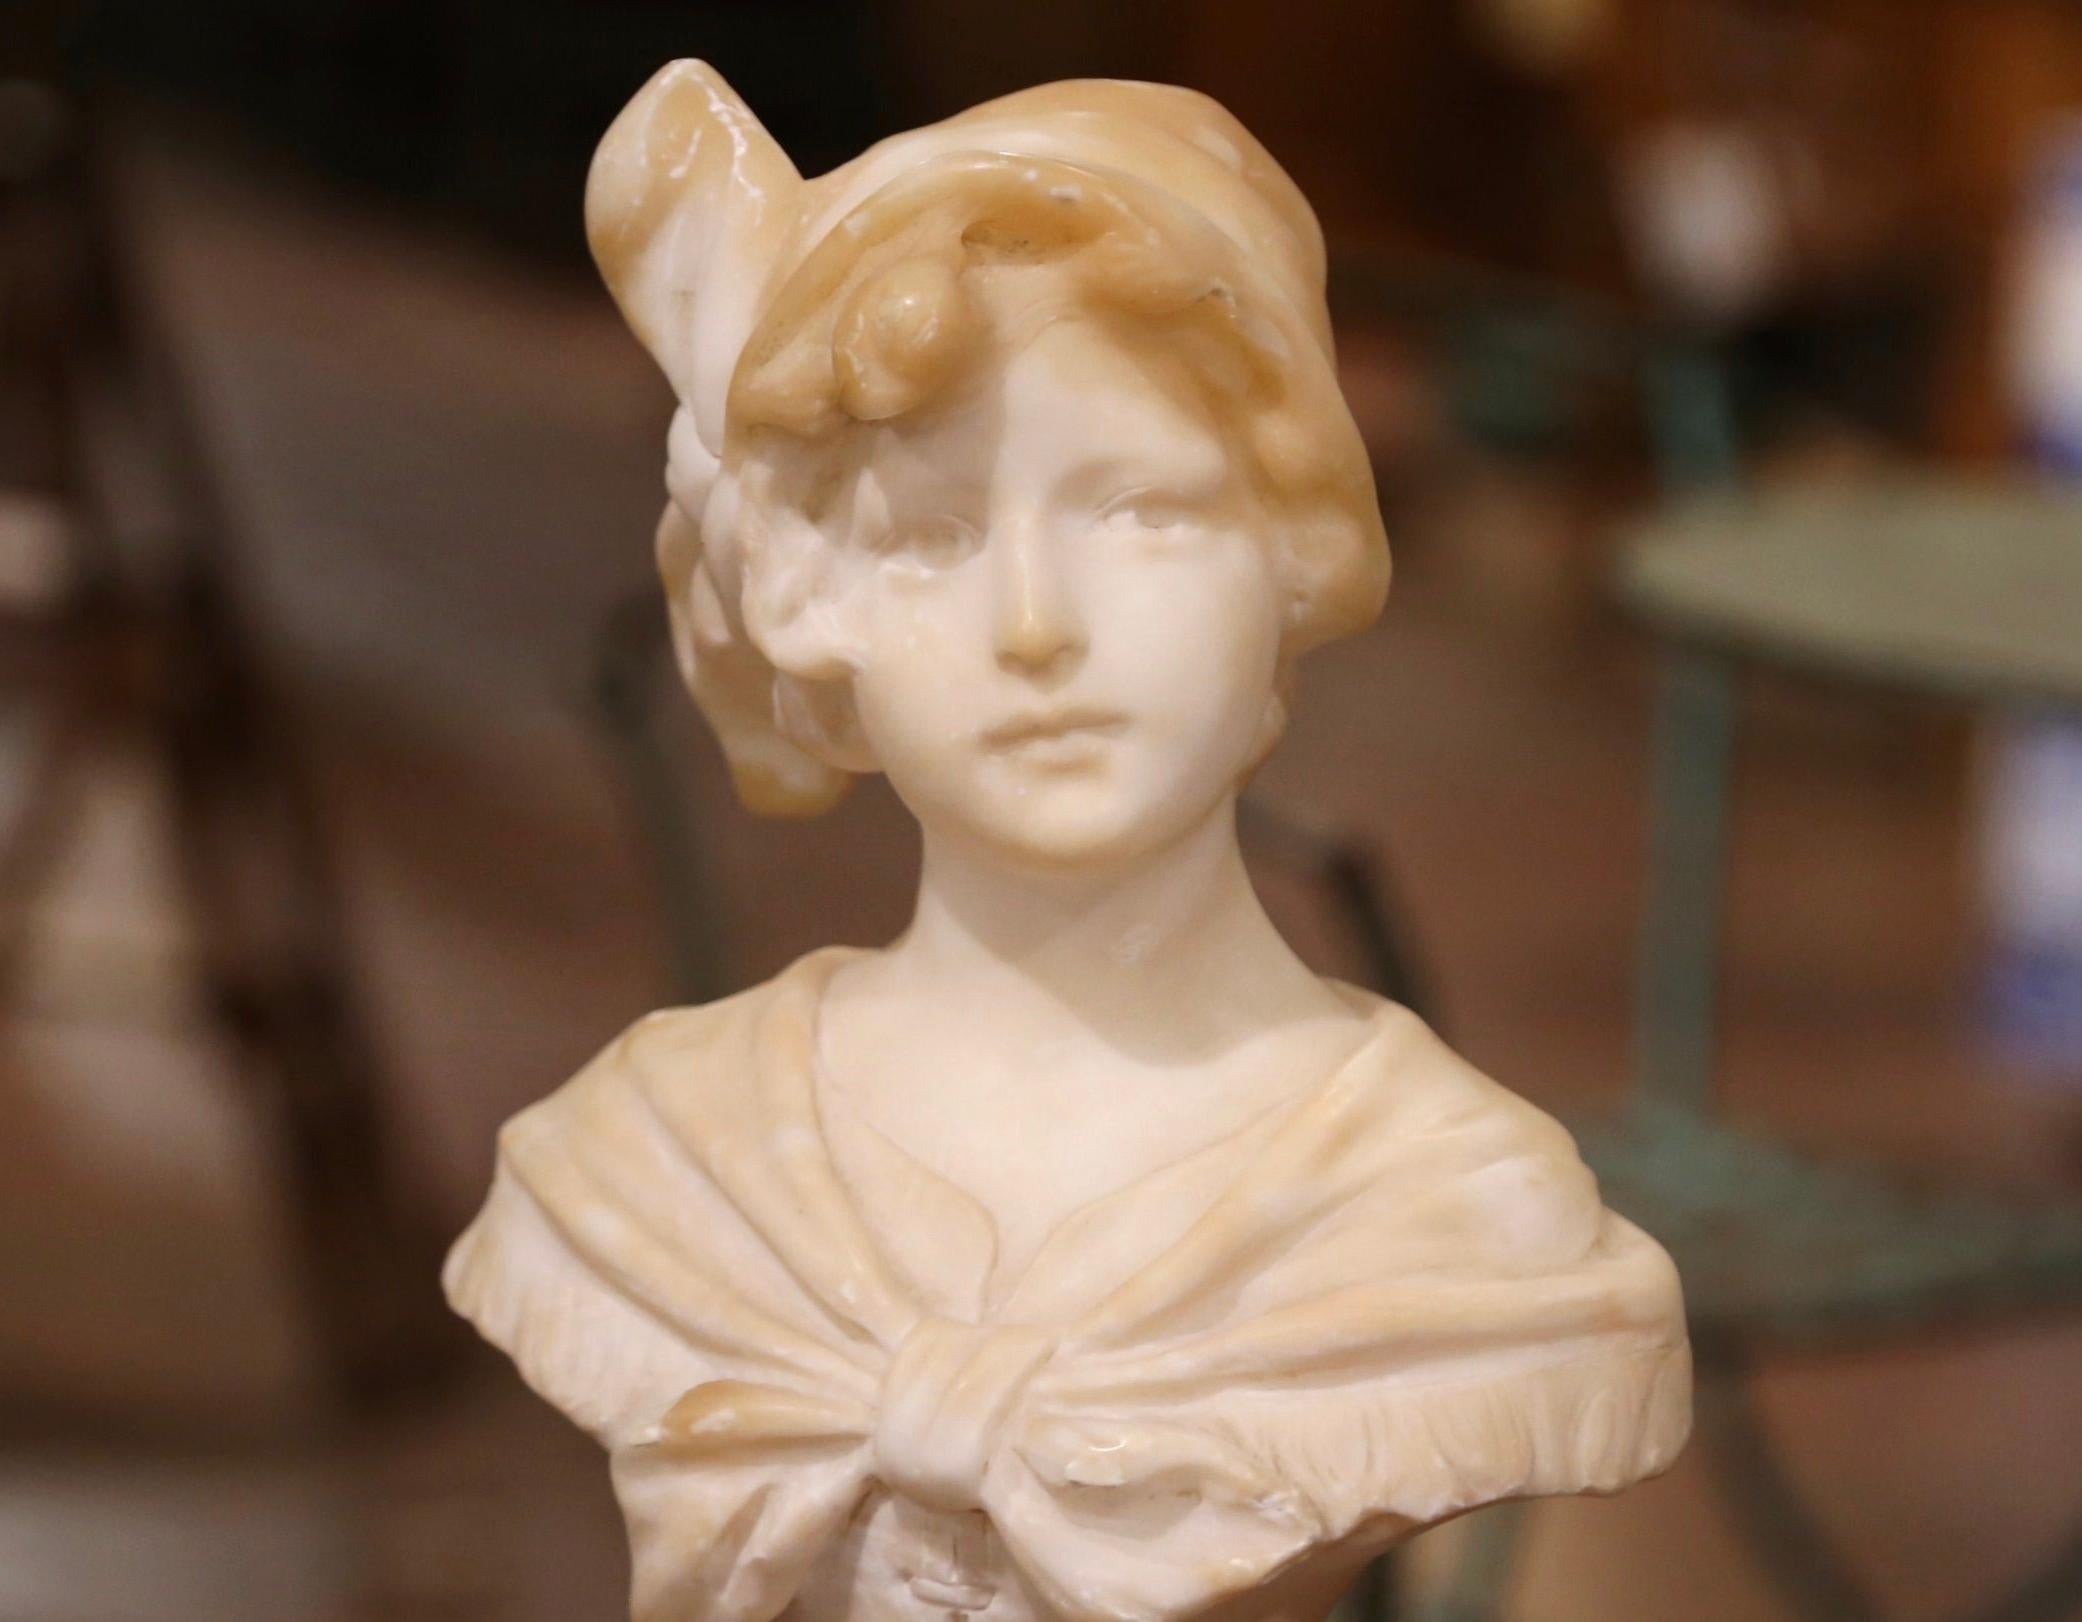 Crafted in France circa 1870, this antique marble bust is a true representation of French elegance. The figural sculpture features the visage of a beautiful, young girl wearing hat and side bow, and dressed in a corset under a shoulder shawl tied